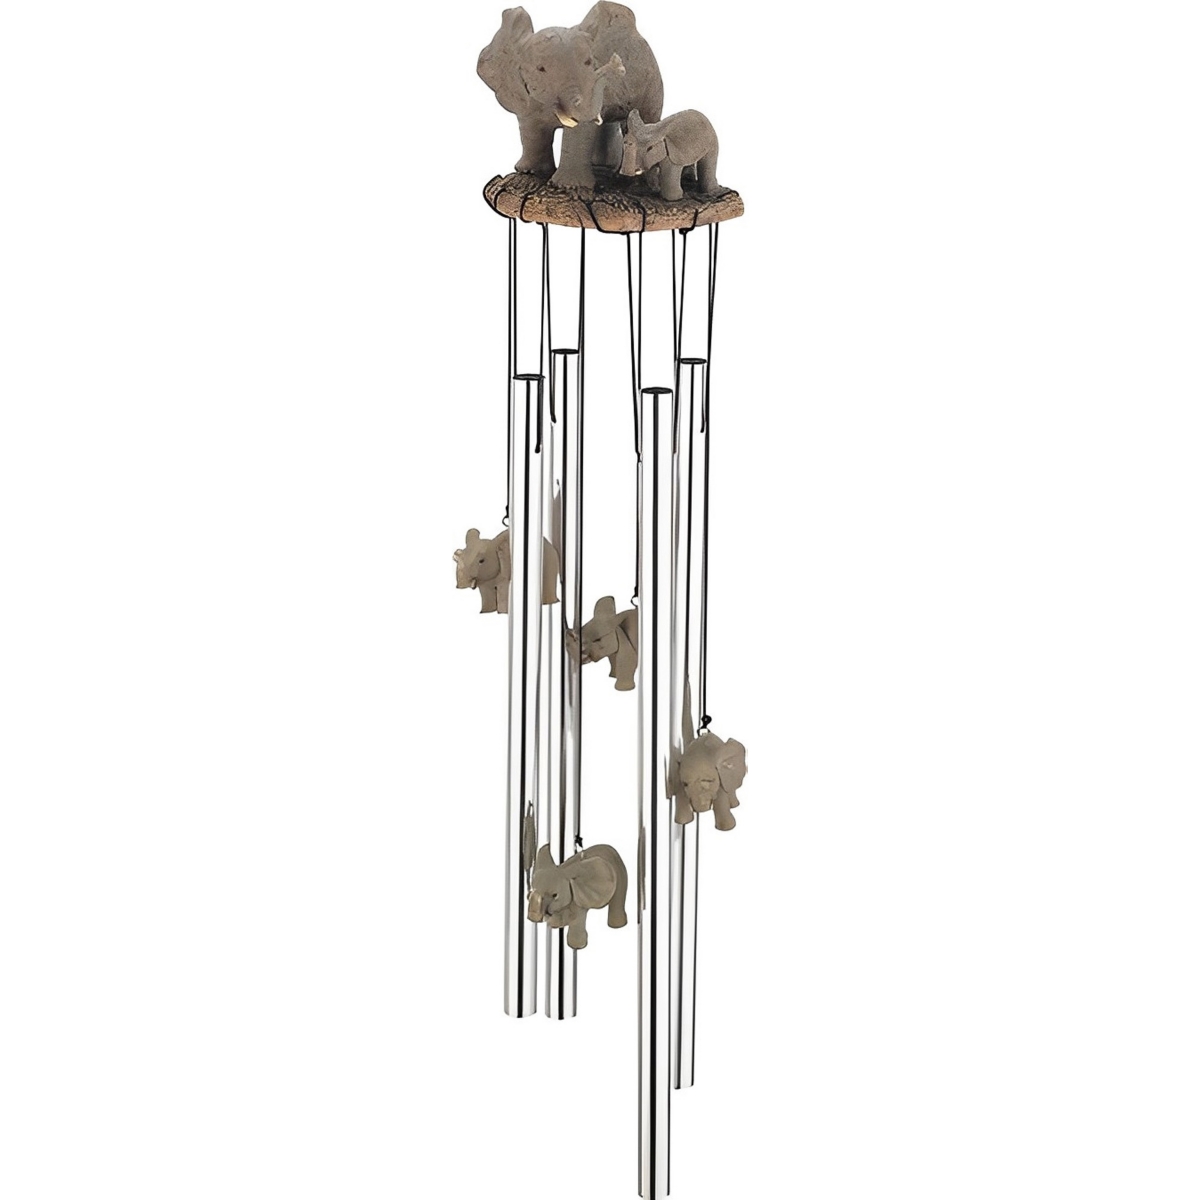 23" Long Elephant Family Round Top Wind Chime Home Decor Perfect Gift for House Warming, Holidays and Birthdays - Silver